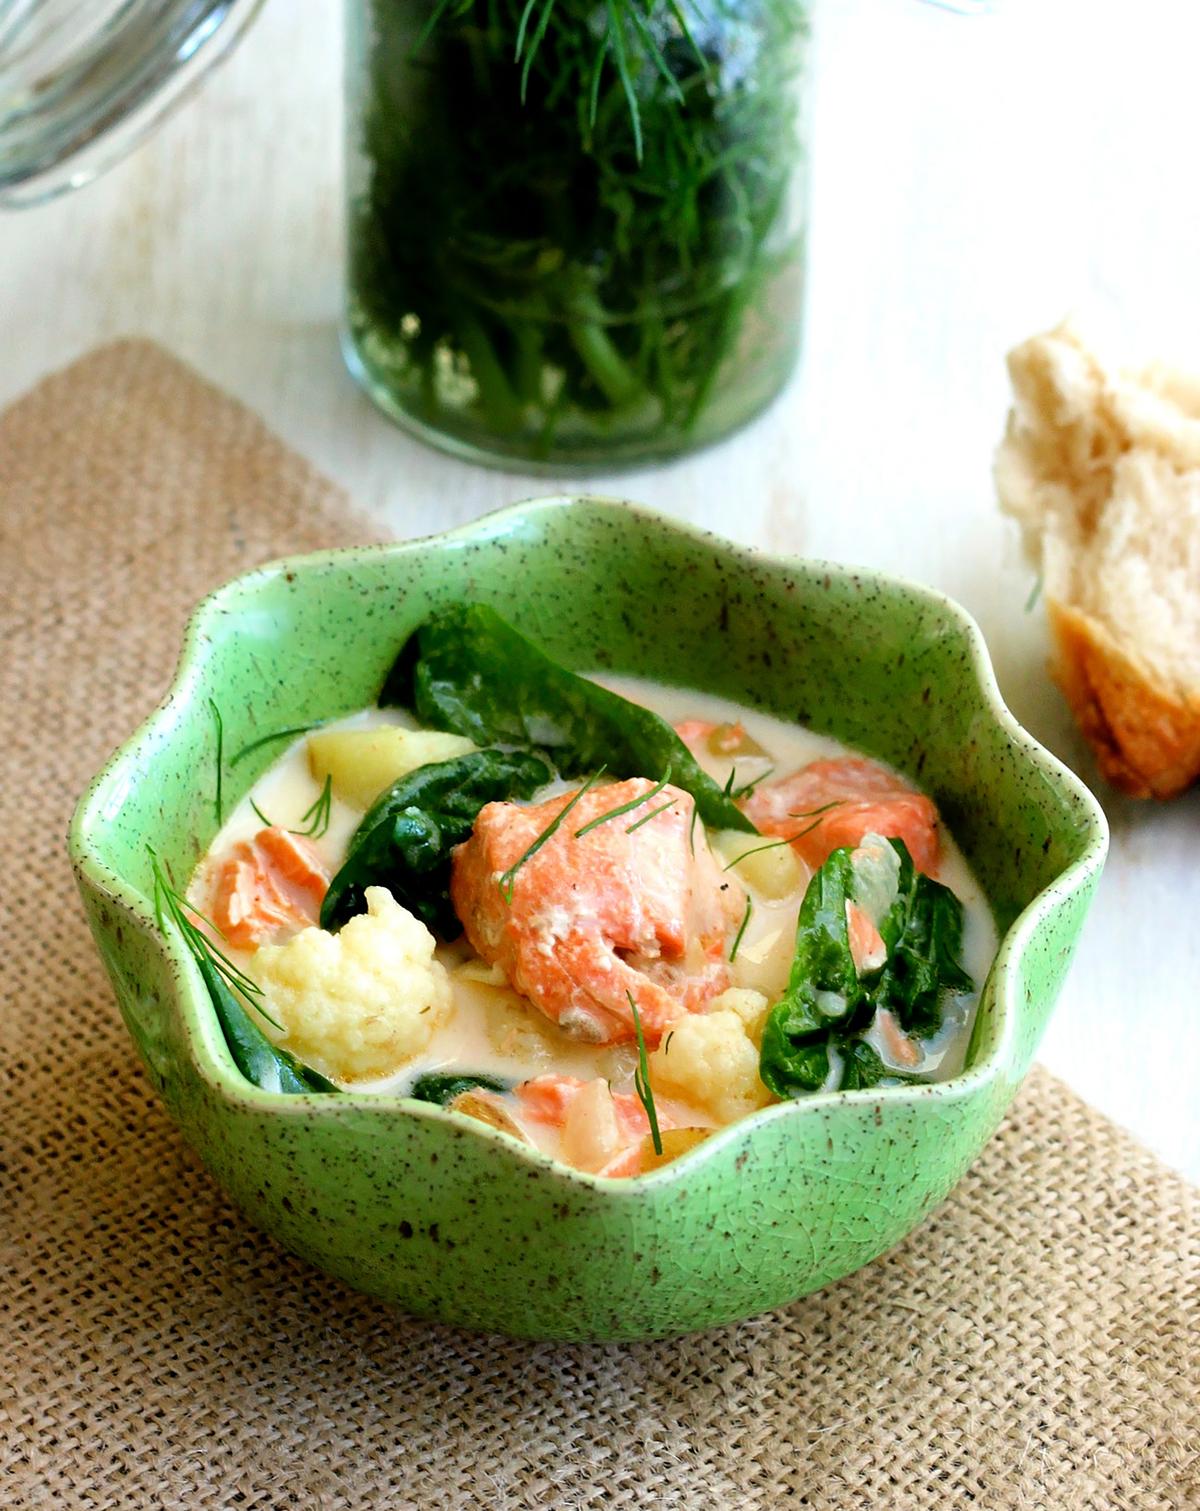 Chicken stock makes a surprising base for this satisfying salmon chowder. (Lynda Balslev for Tastefood)